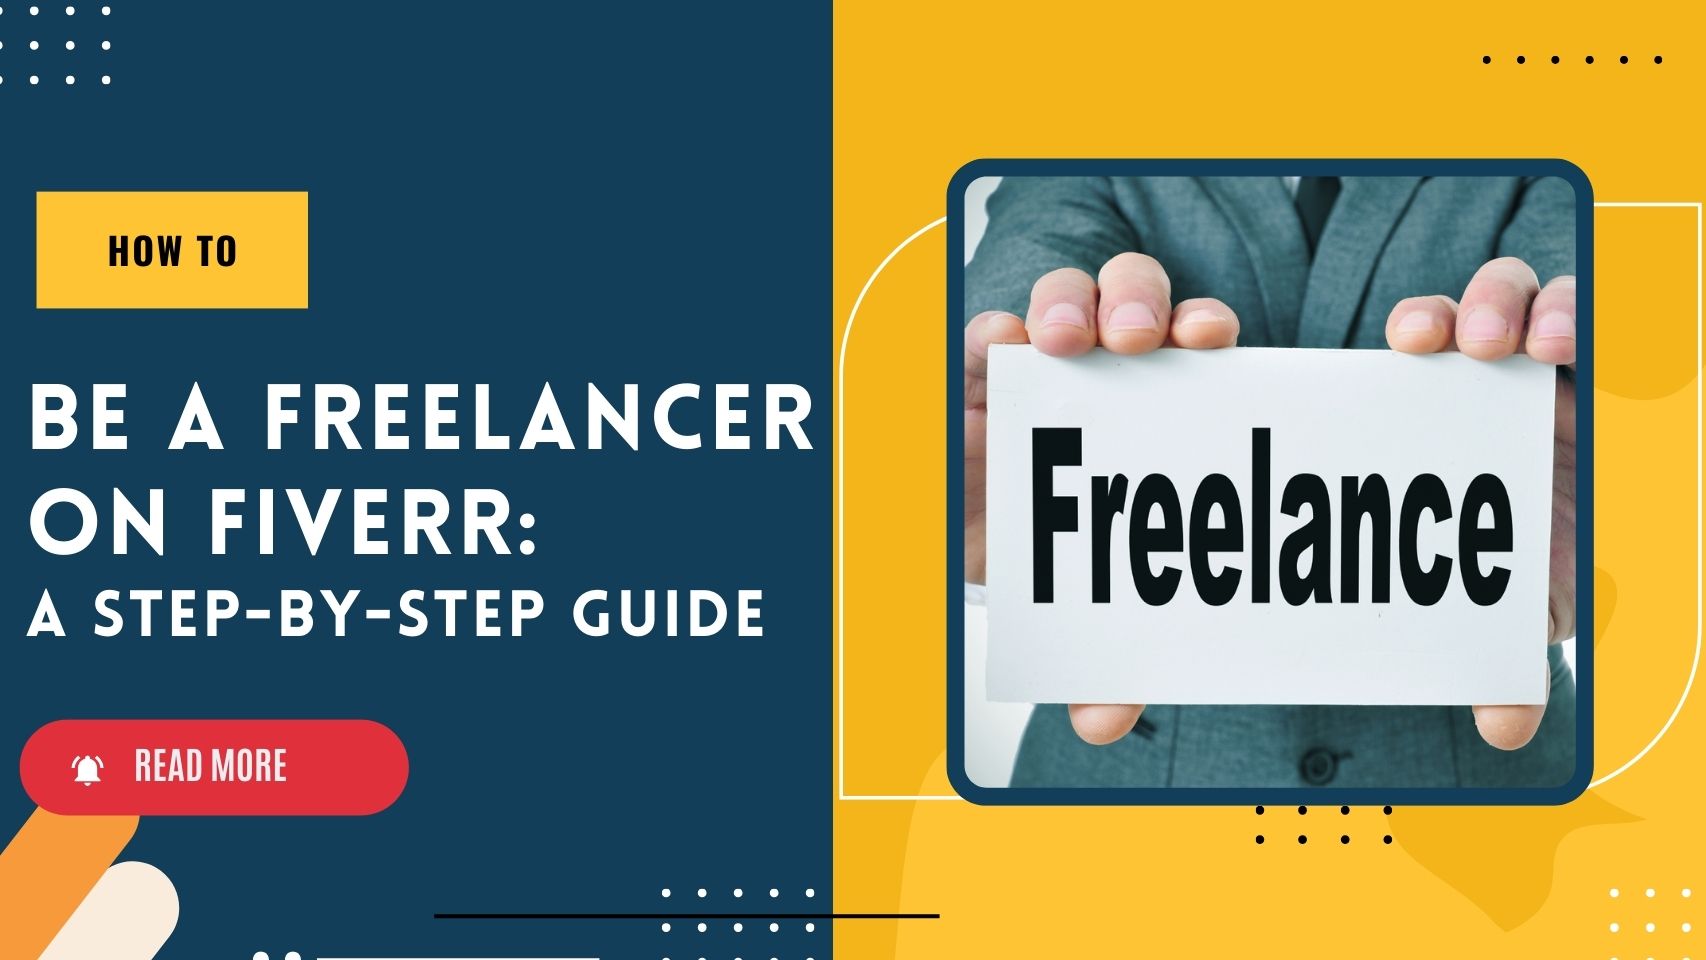 How to Be a Freelancer on Fiverr: A Step-by-Step Guide